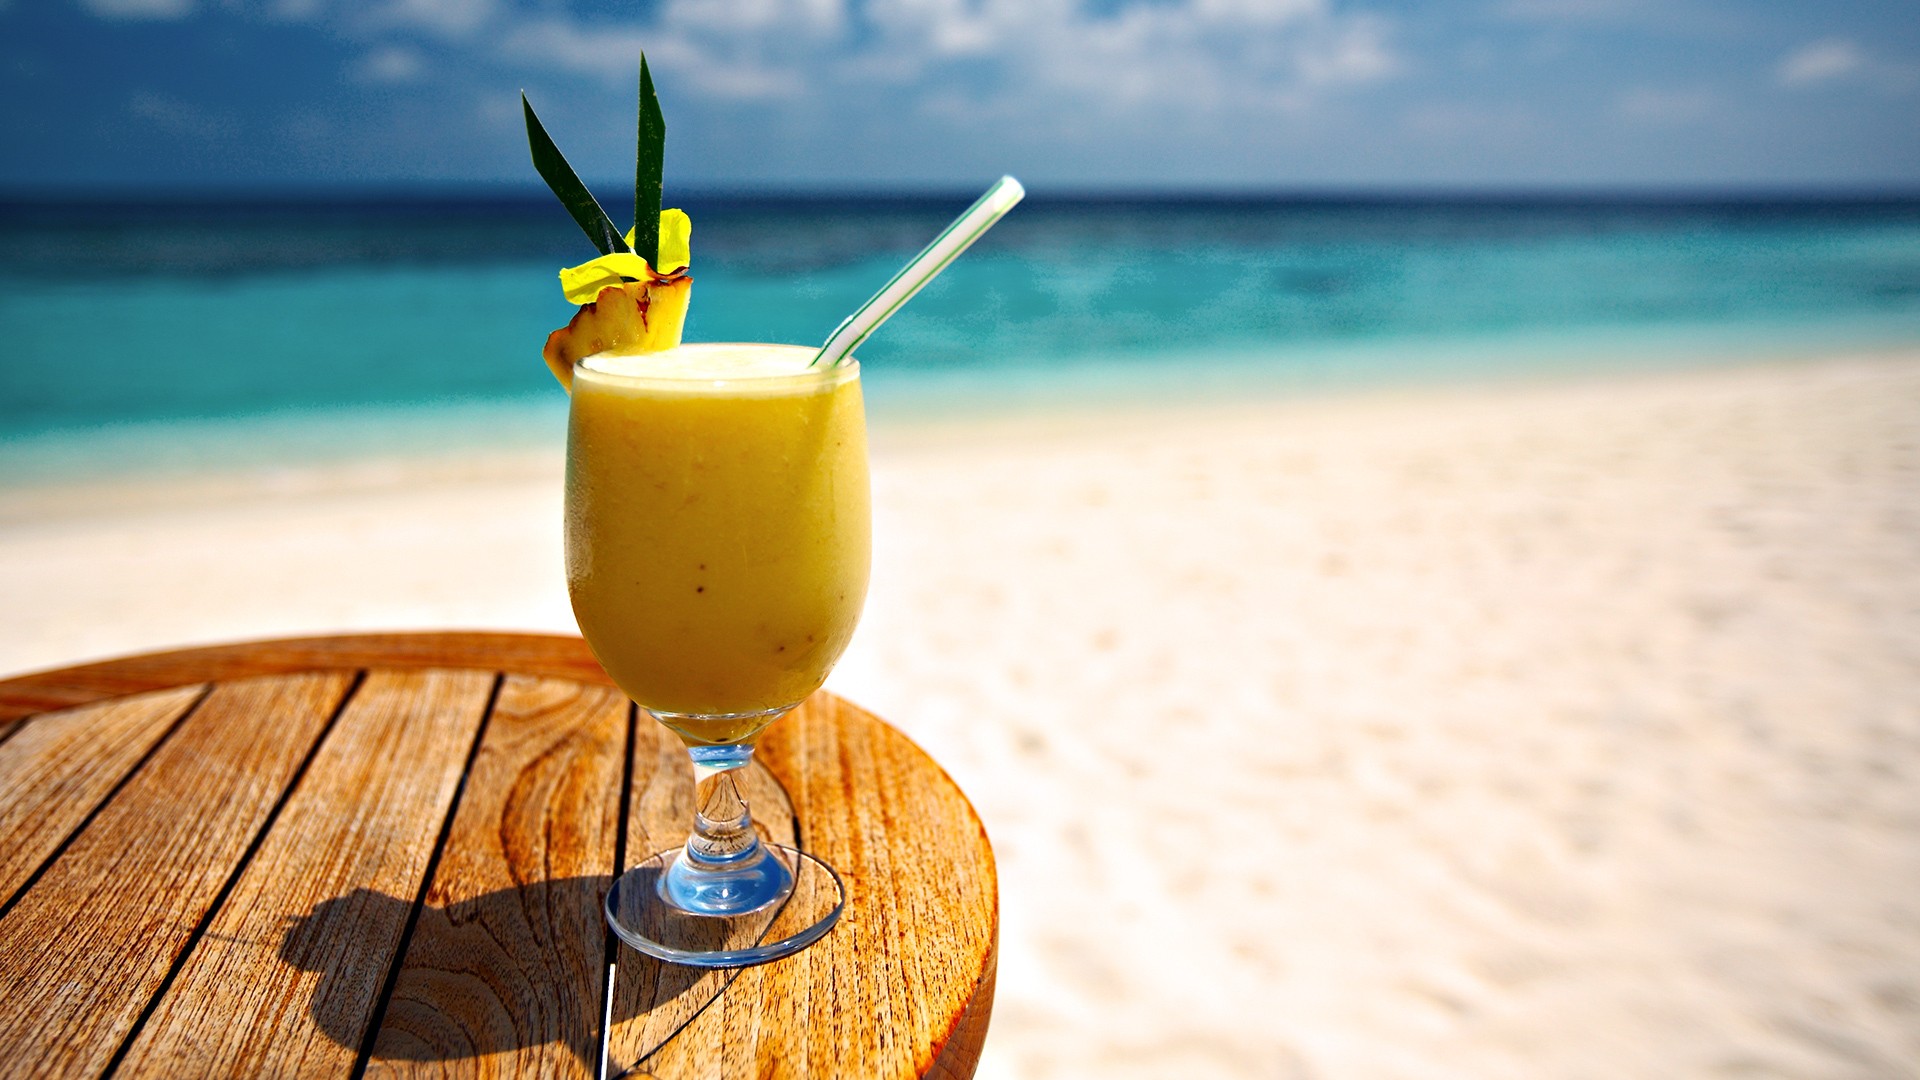 General 1920x1080 cocktails sea beach food outdoors drinking straw